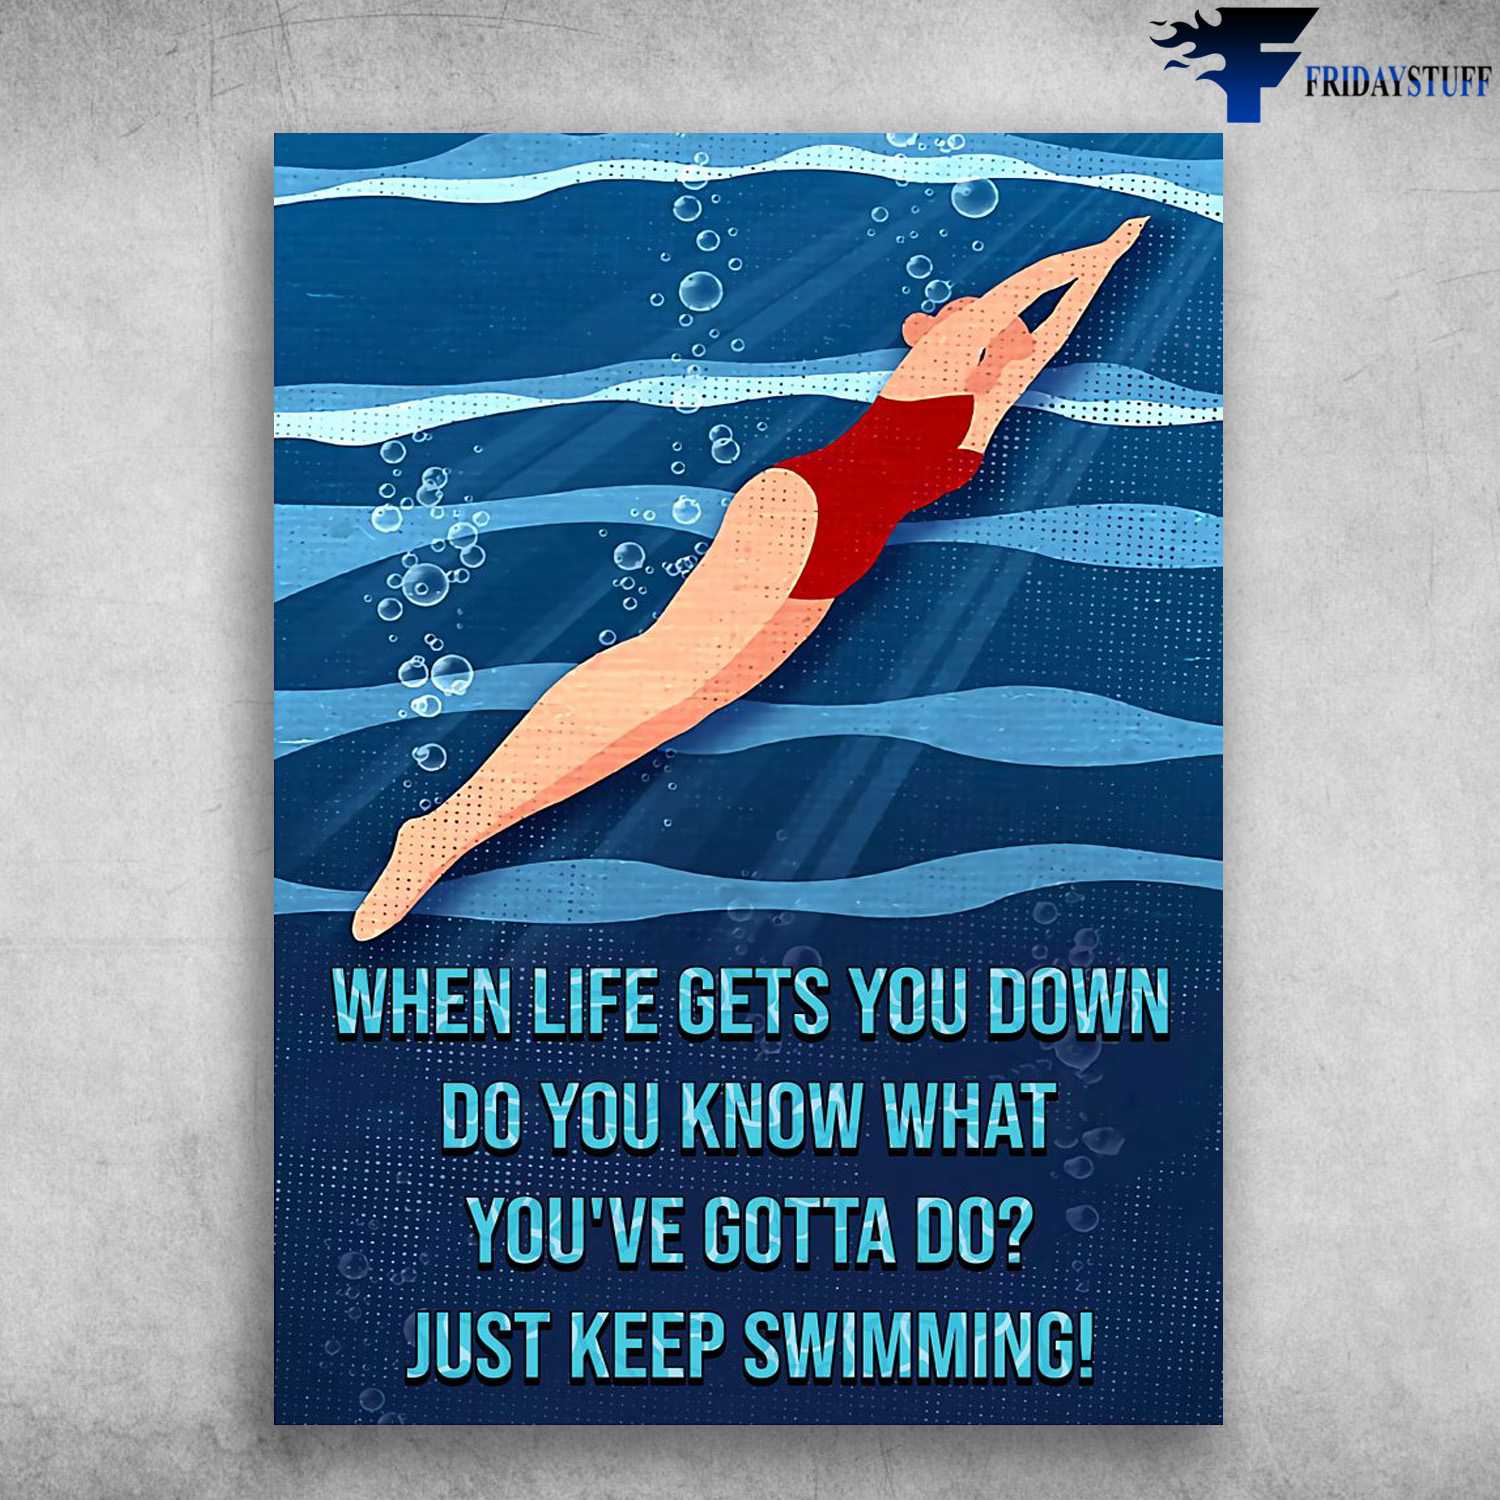 Swimming Poster, When Life Gets You Down, Do You Know What, You've Gotta Do, Just Keep SwimmingSwimming Poster, When Life Gets You Down, Do You Know What, You've Gotta Do, Just Keep Swimming